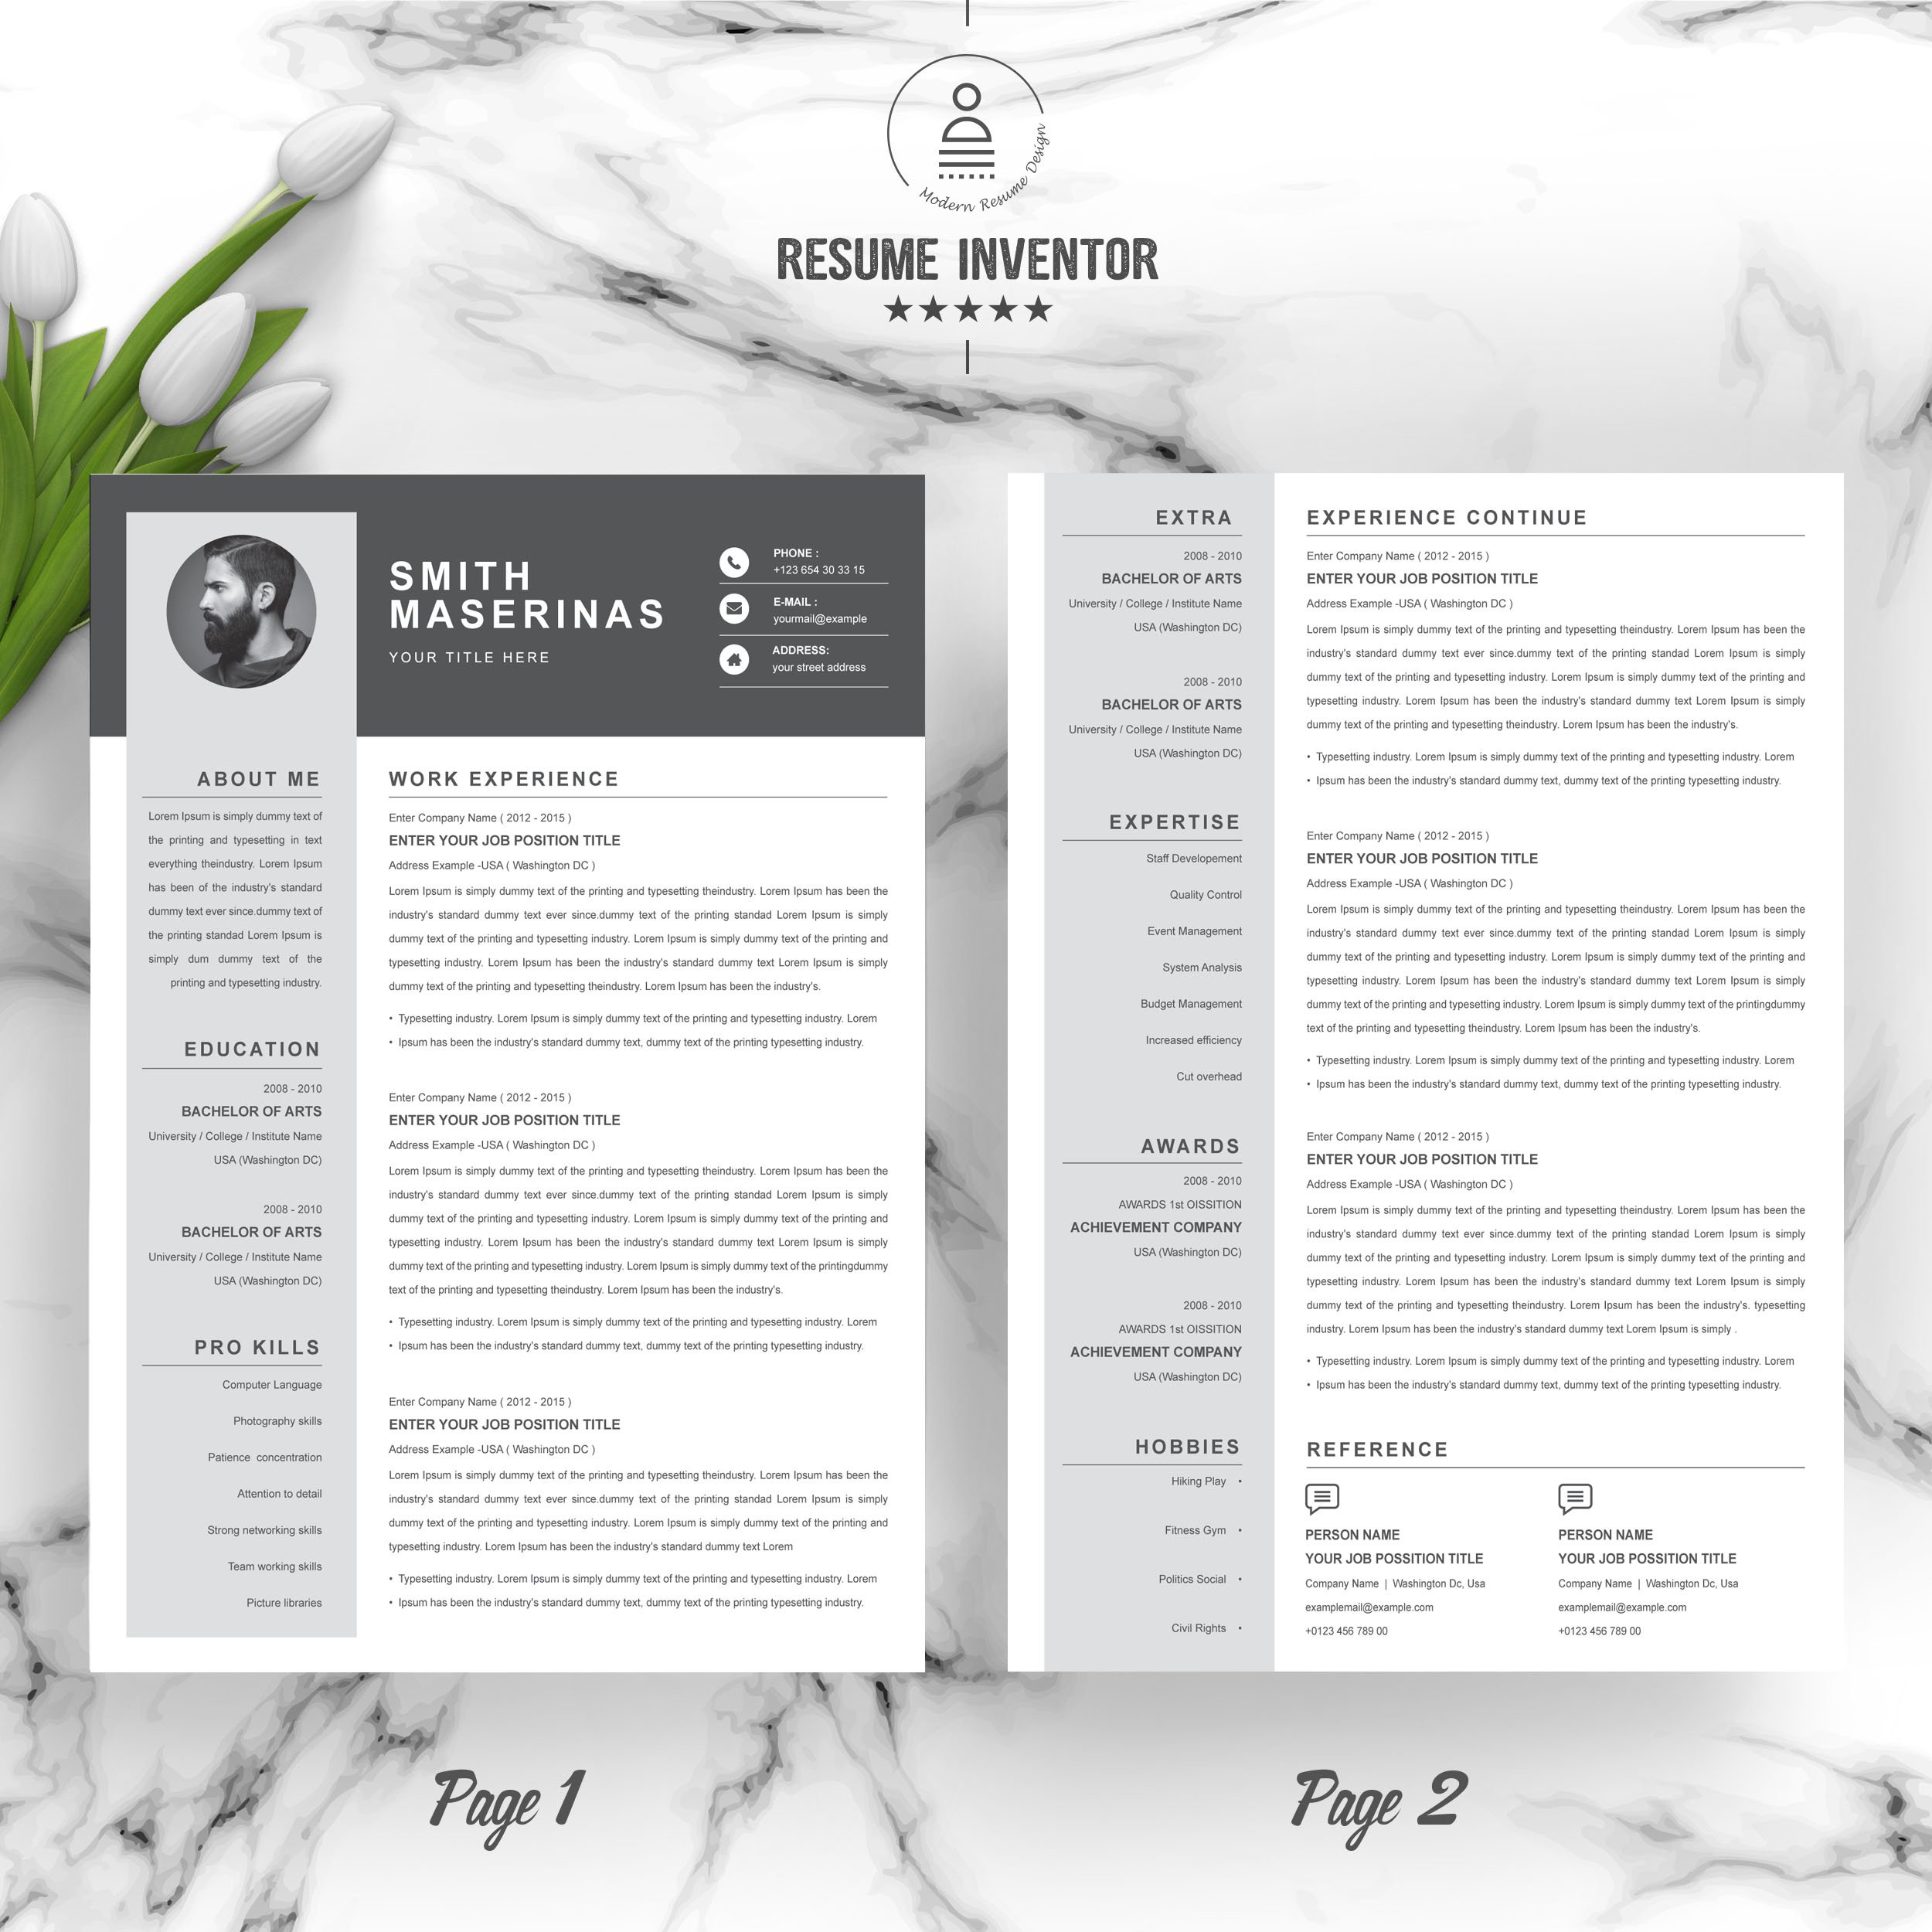 Professional Resume | Modern Resume preview image.